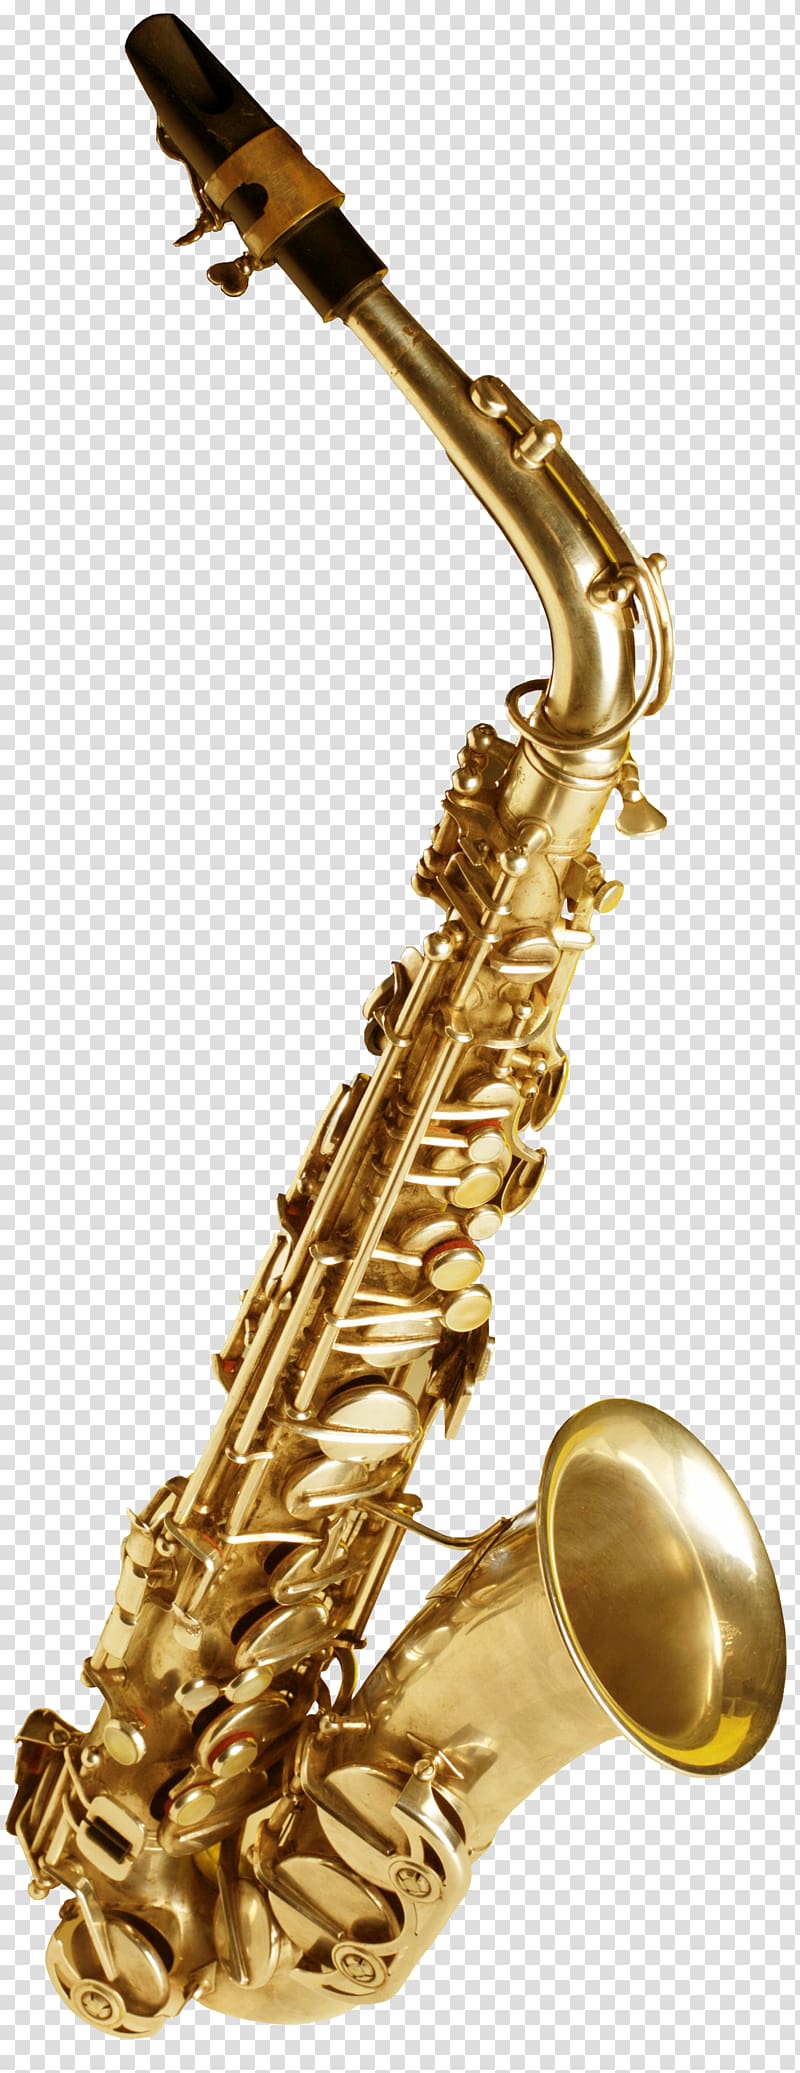 brass-colored saxophone, Musical instrument Saxophone , Sax transparent background PNG clipart